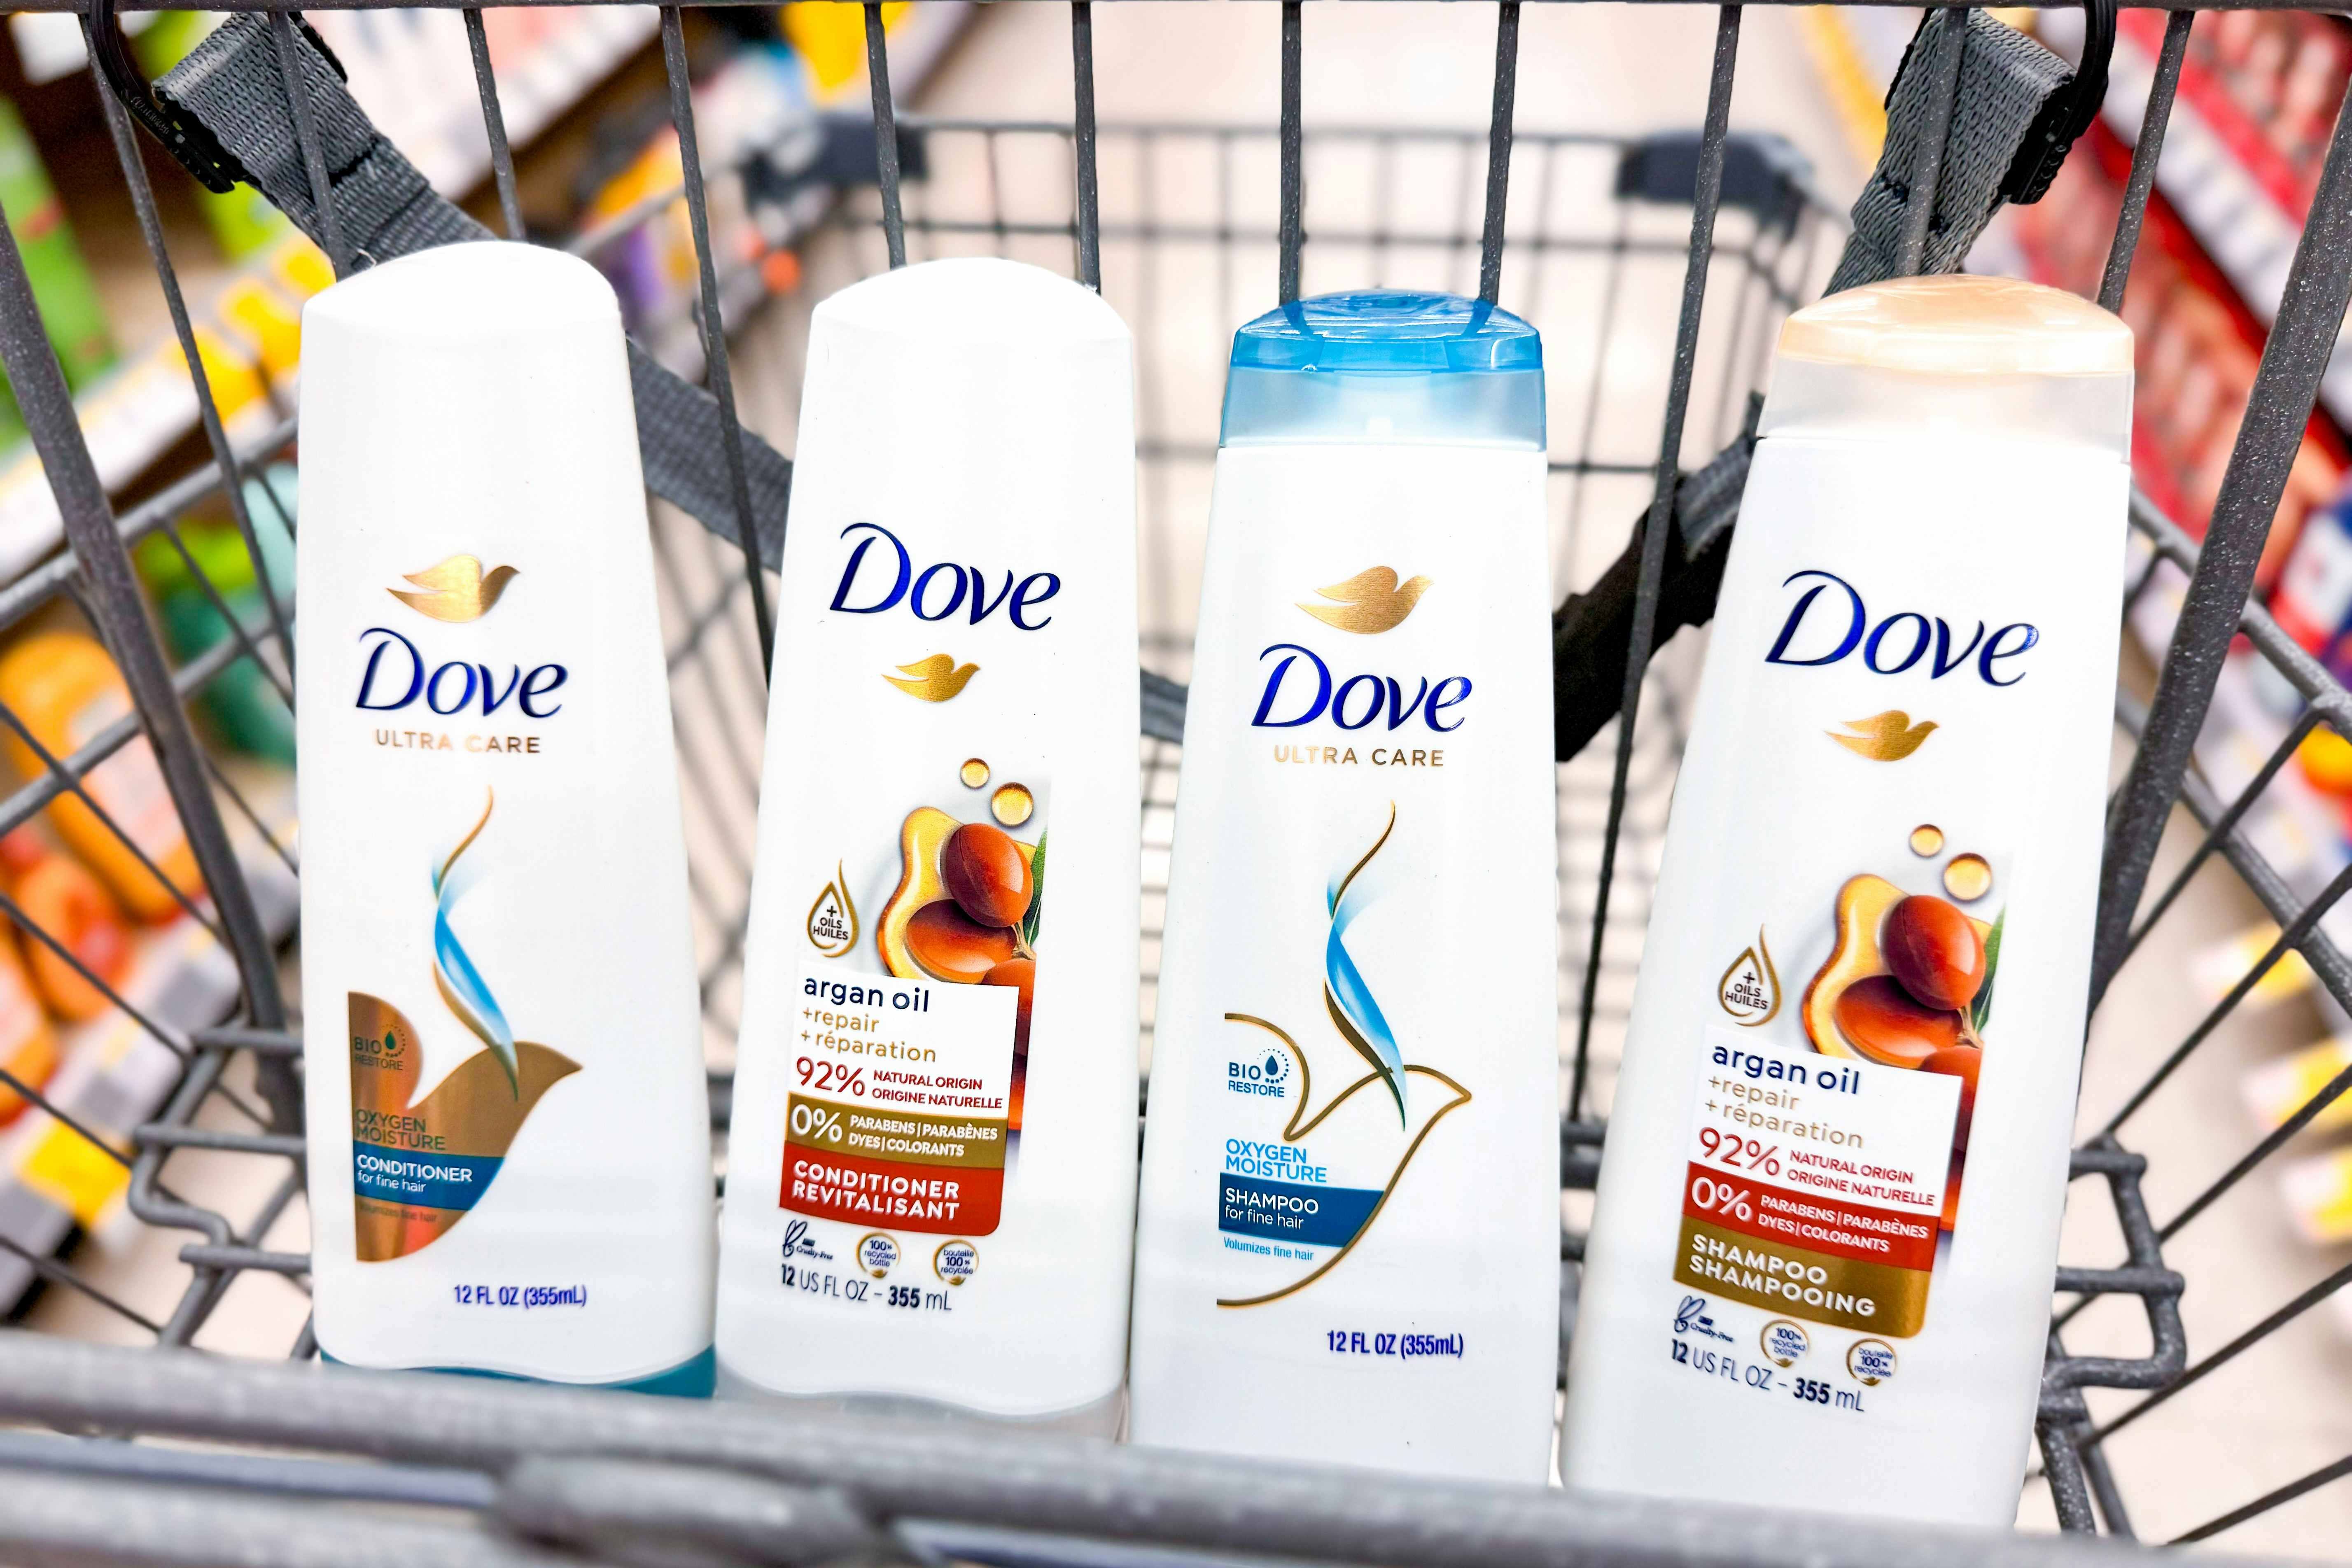 Free Dove Hair Care and $0.09 Dove Men+Care at Walgreens